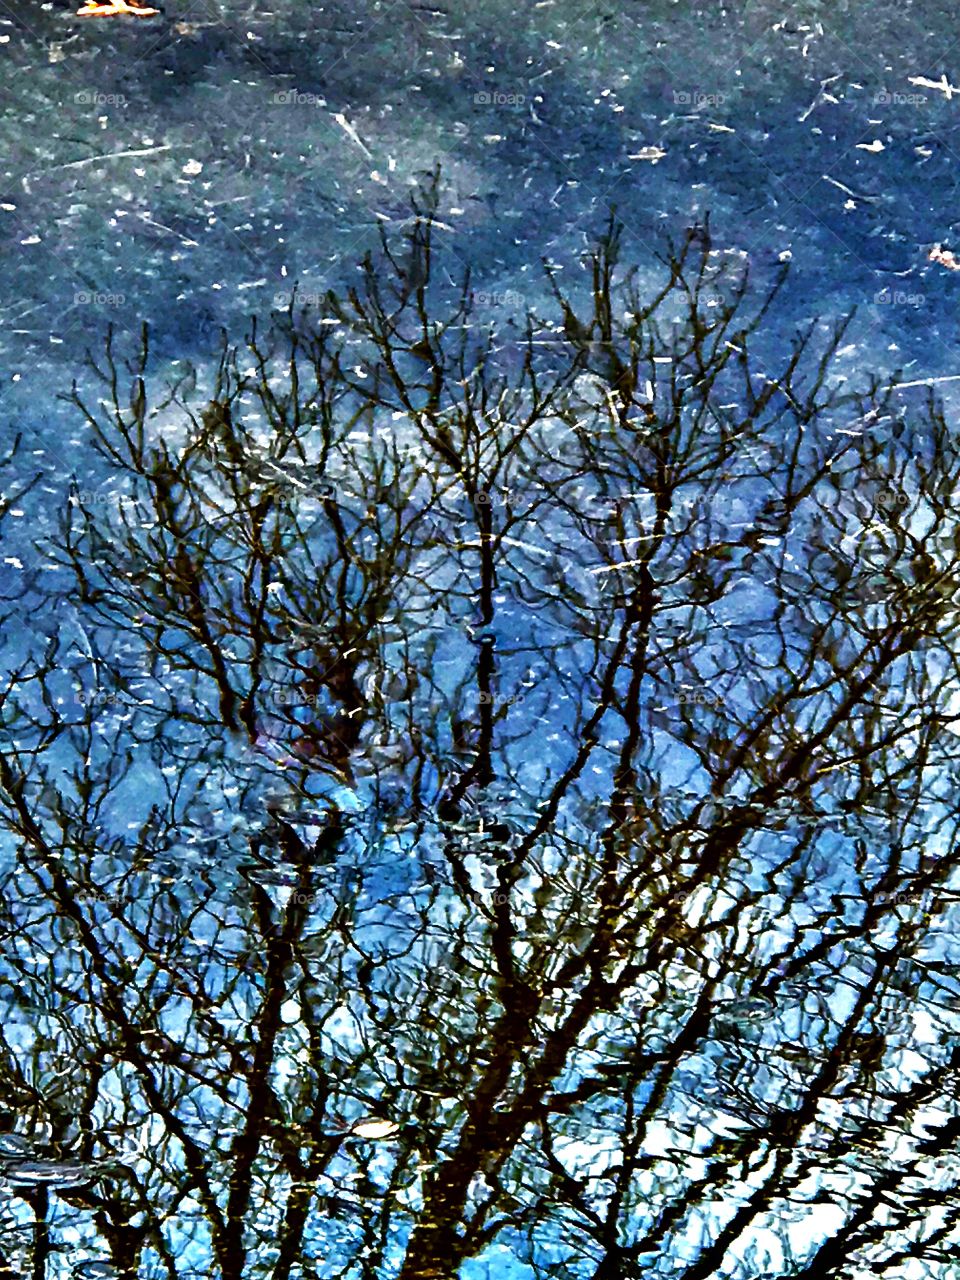 Reflection of tree in puddle of water. 